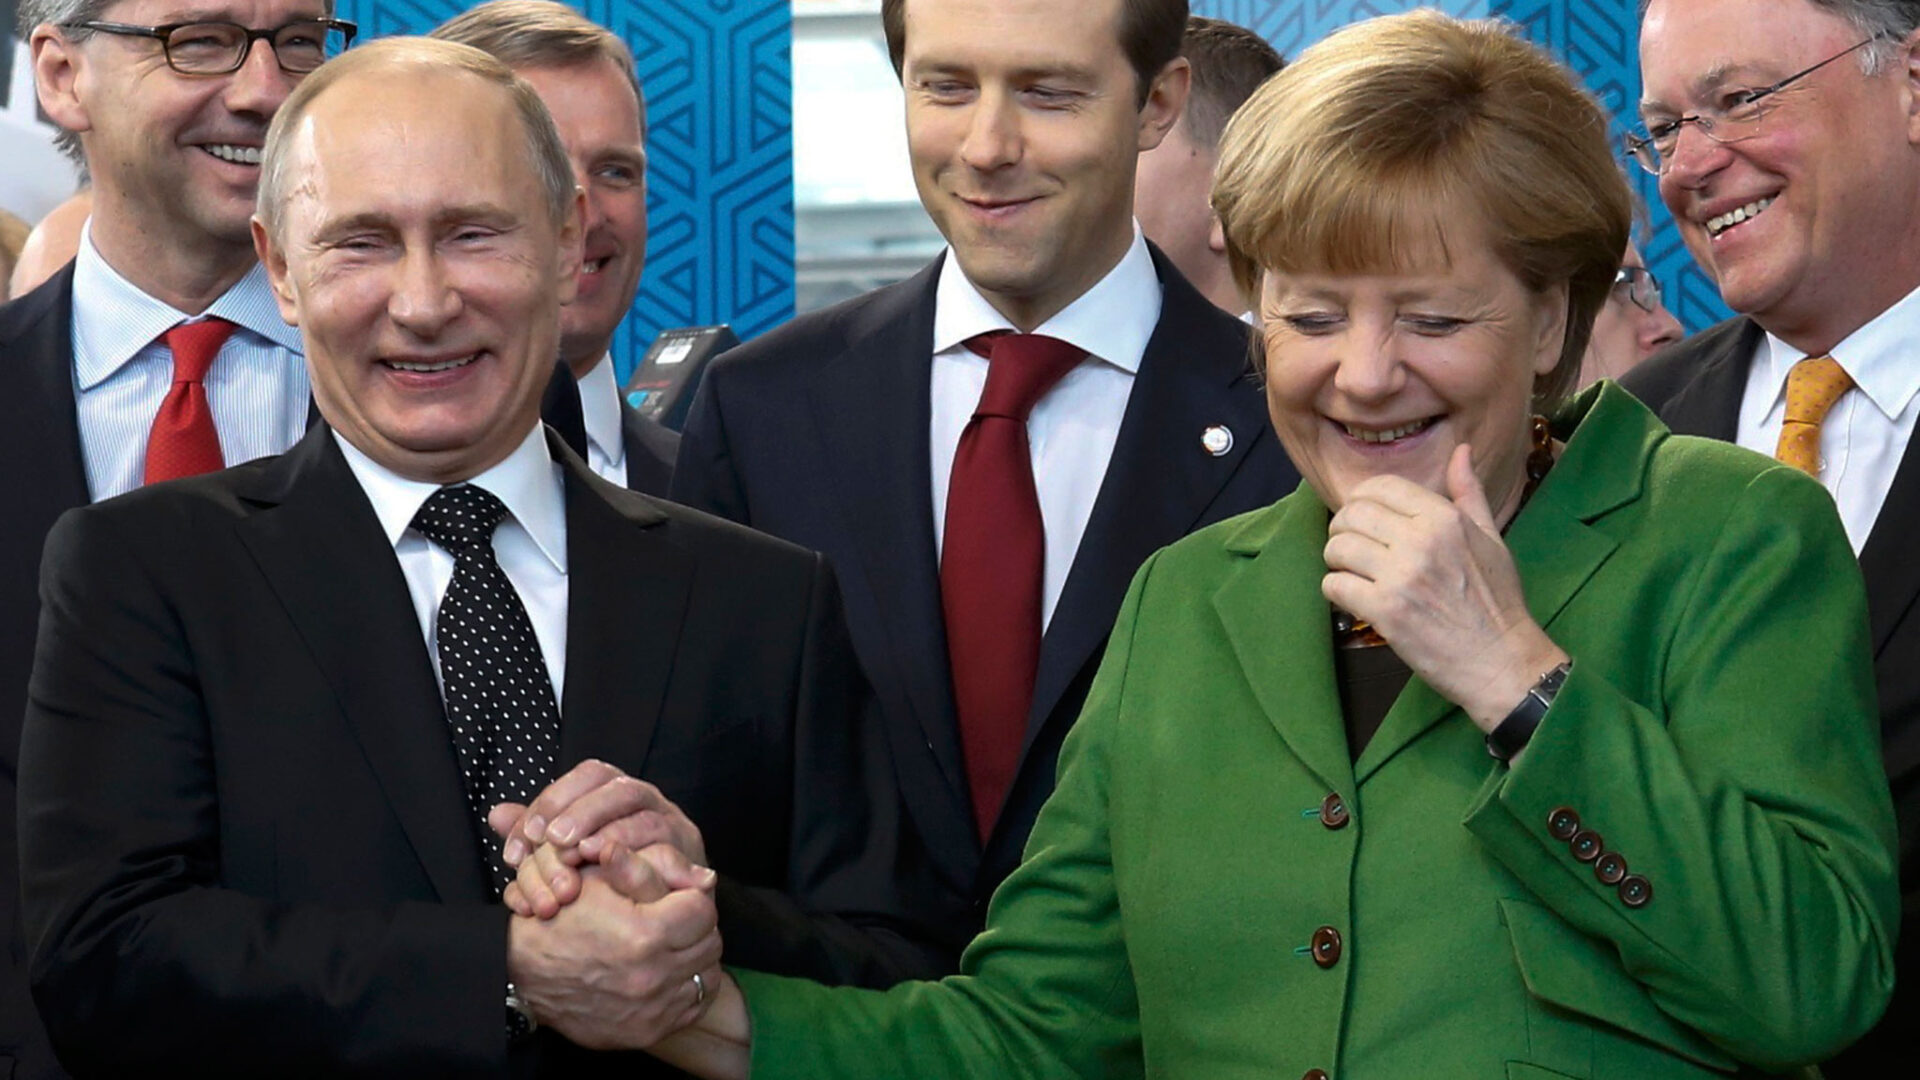 Russian President Putin holds hand of German Chancellor Merkel during tour of Hanover Messe in Hanover